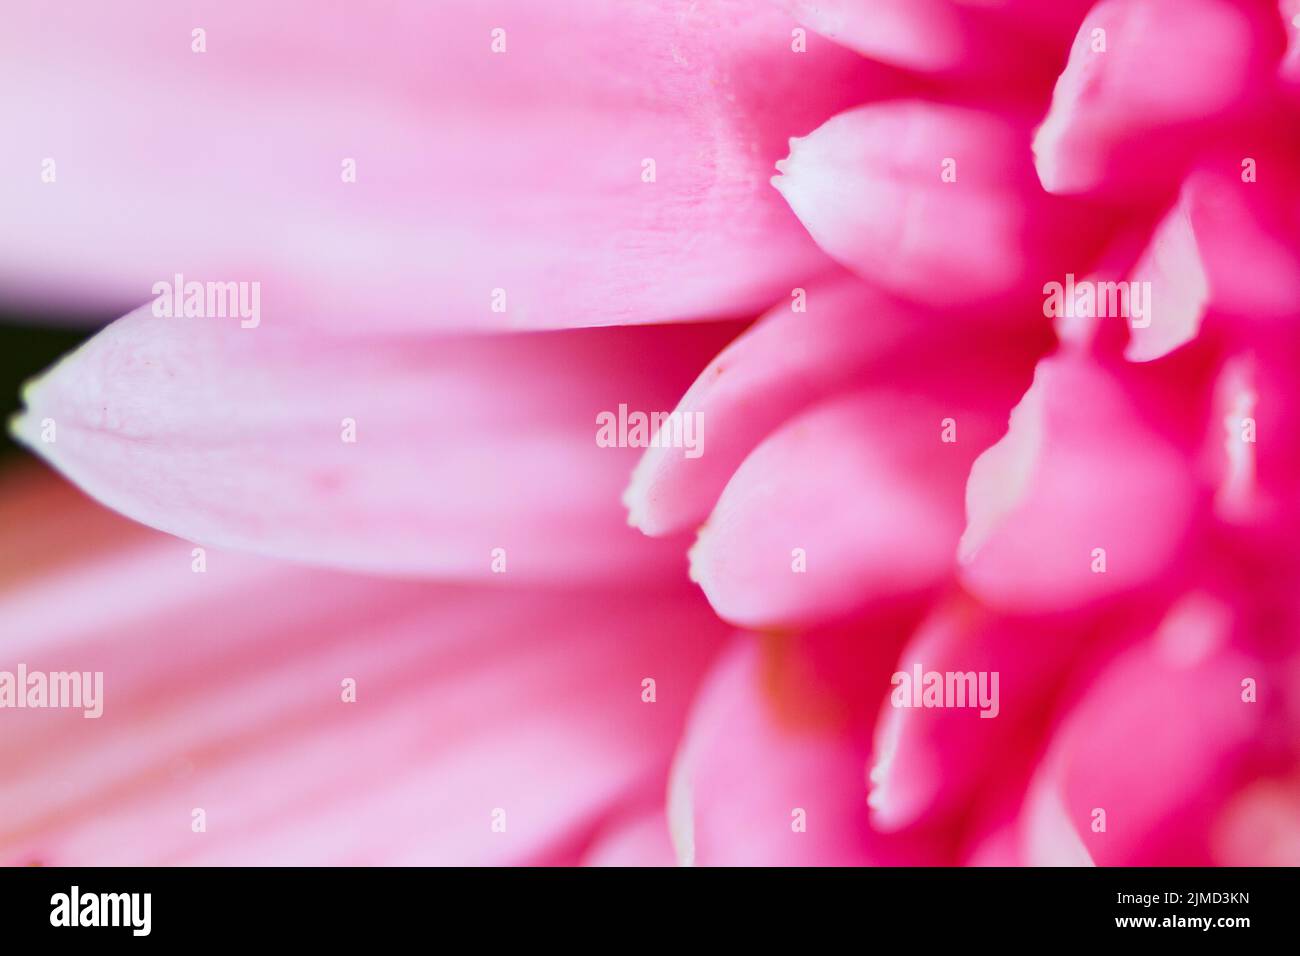 Pink Gerbera Daisy Petals close-up blurred suitable as Background, Backdrop, or Wallpaper. Stock Photo